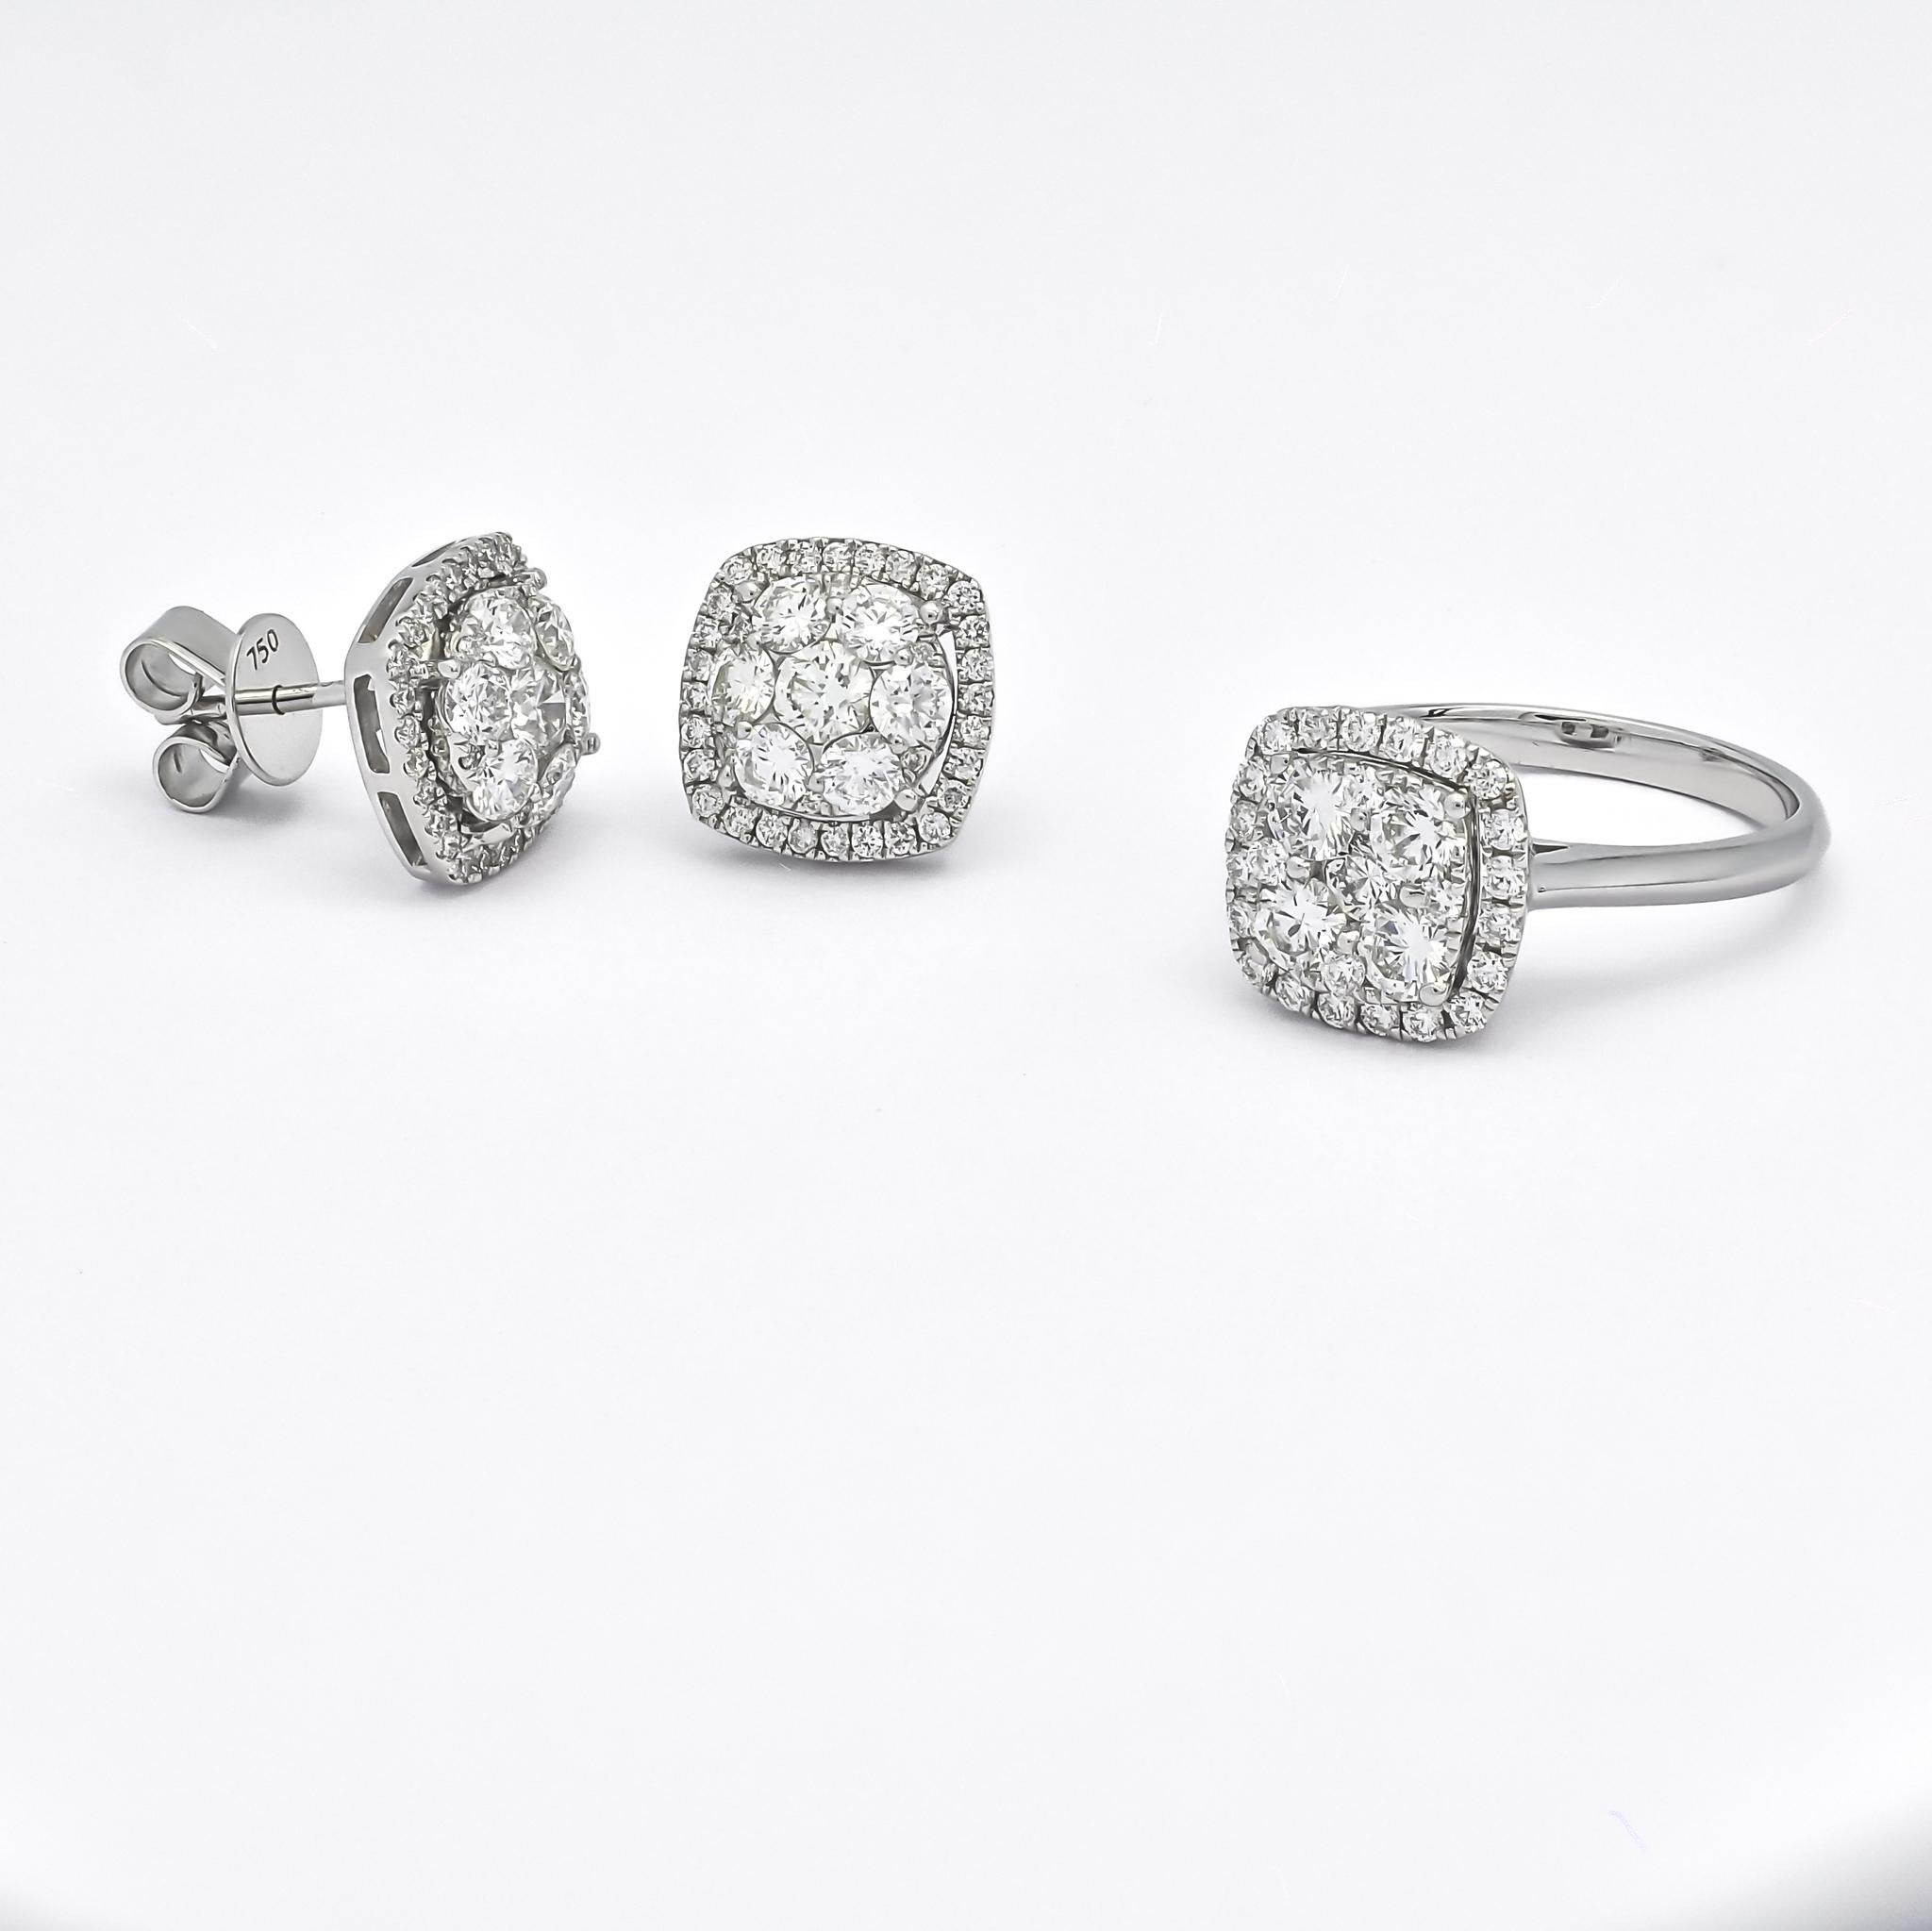 The earrings themselves are a testament to timeless elegance. Crafted with meticulous attention to detail, they feature a delicate, yet captivating design that accentuates the inherent brilliance of each diamond. 

The central round-cut diamonds,